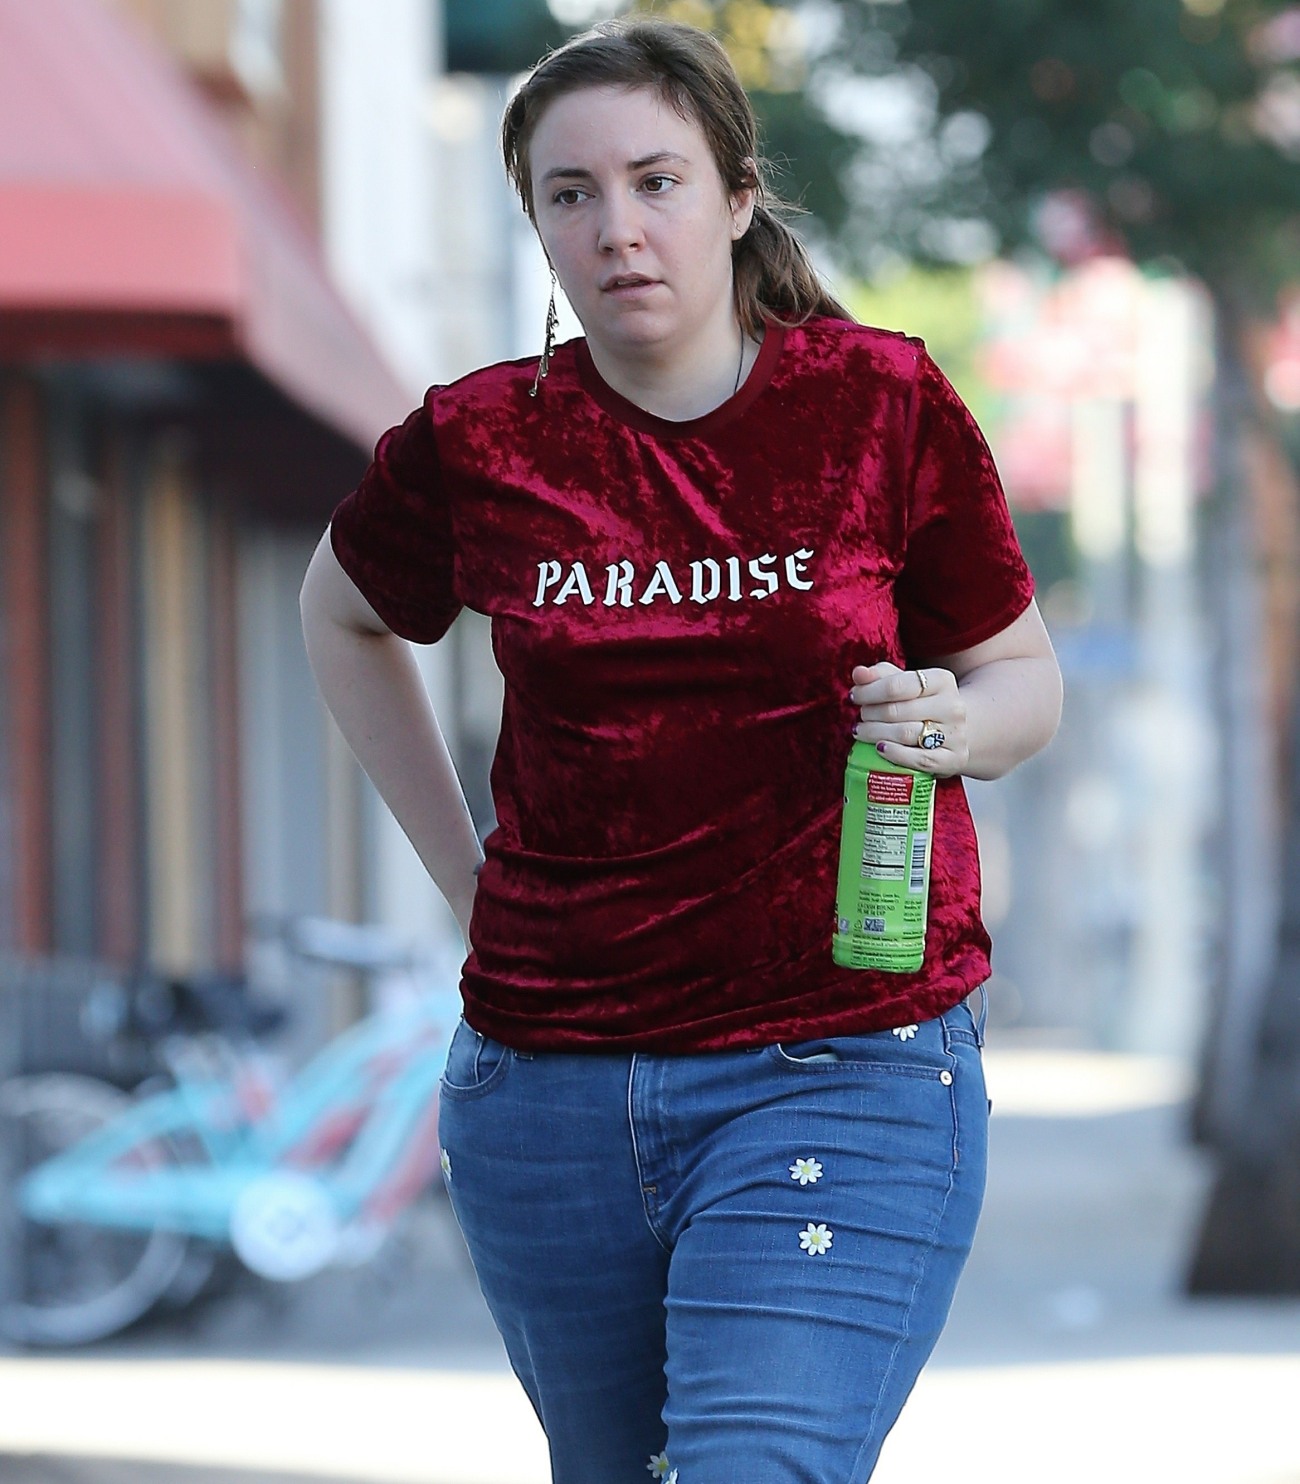 Lena Dunham is looking gloomy while out running errands